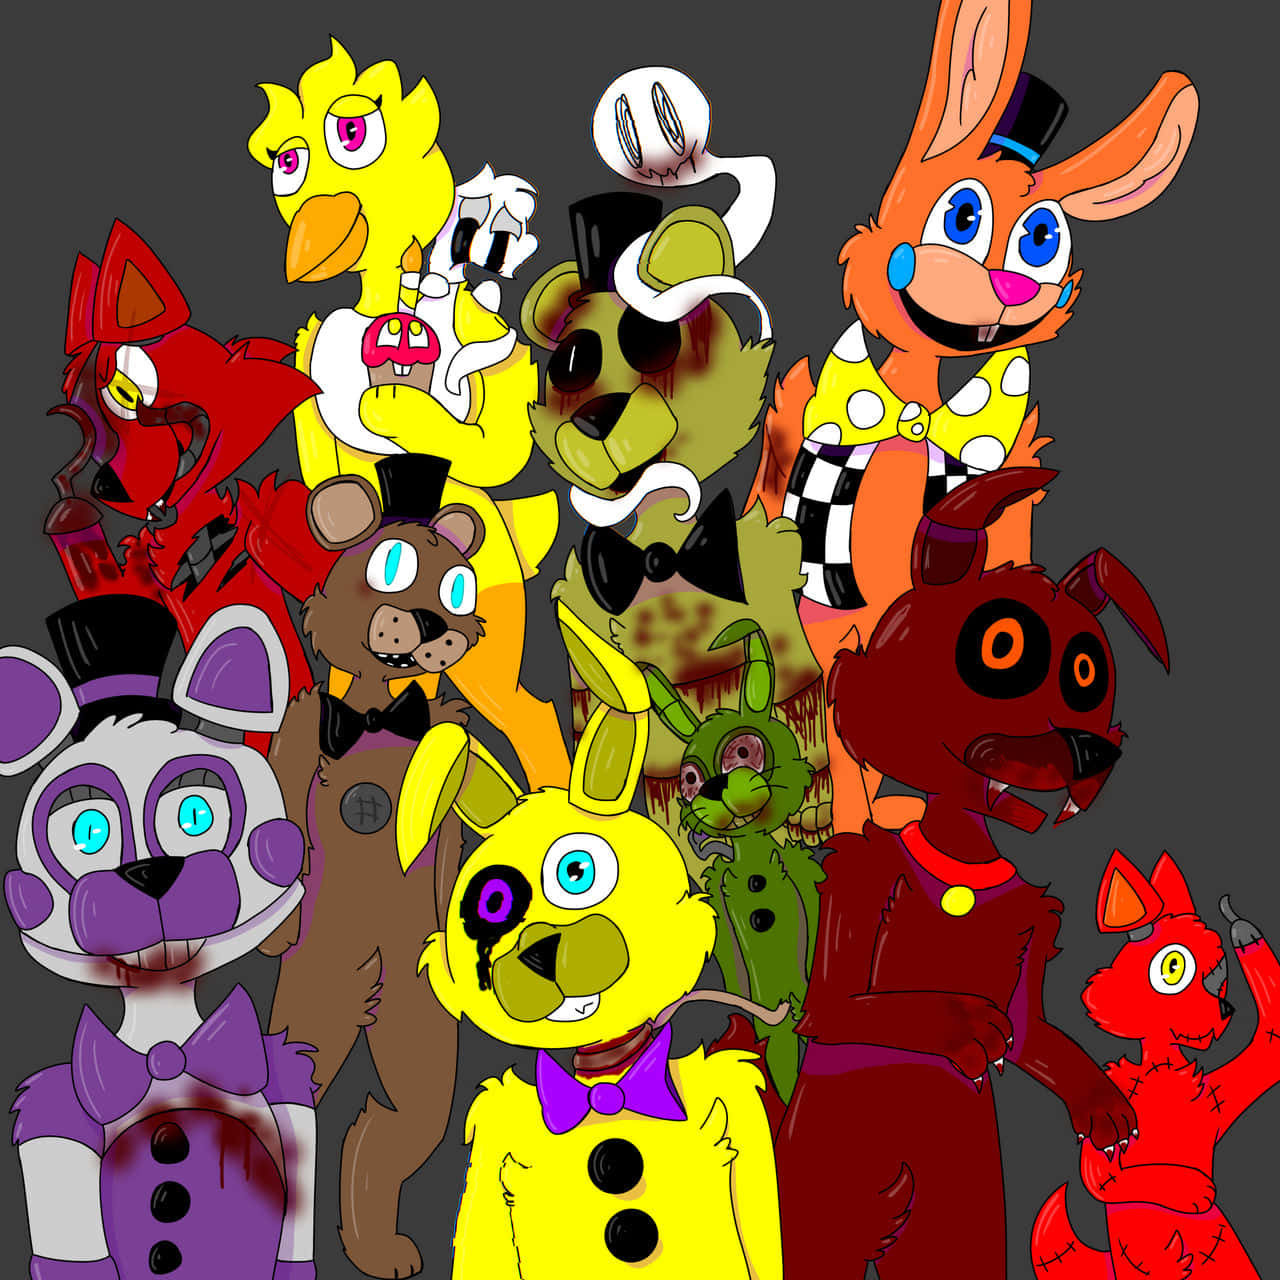 Fazbear Frights: A thrilling adventure with your favorite animatronics Wallpaper